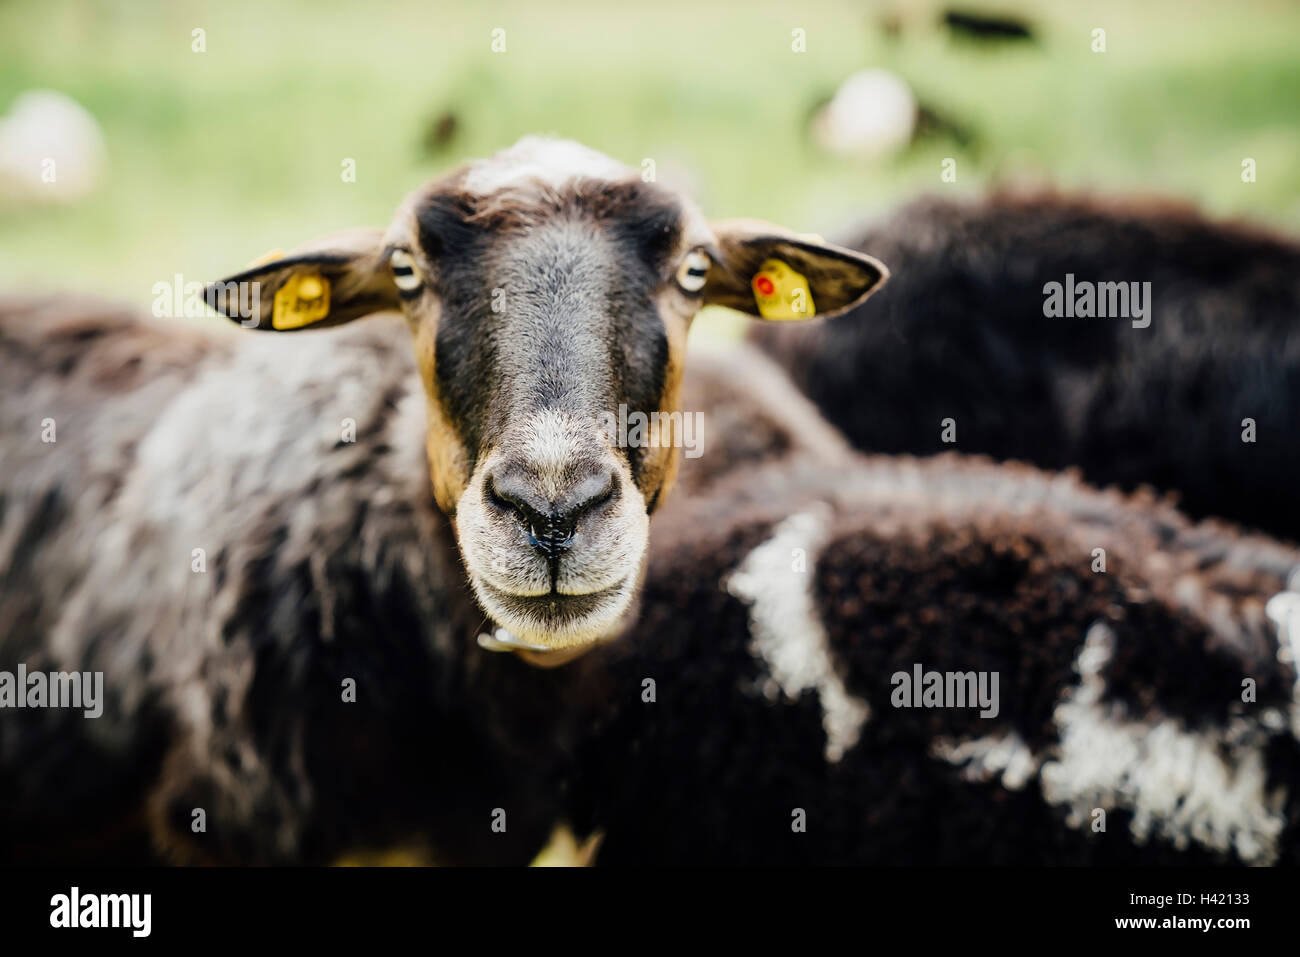 Portrait of sheep with tags in ears Stock Photo